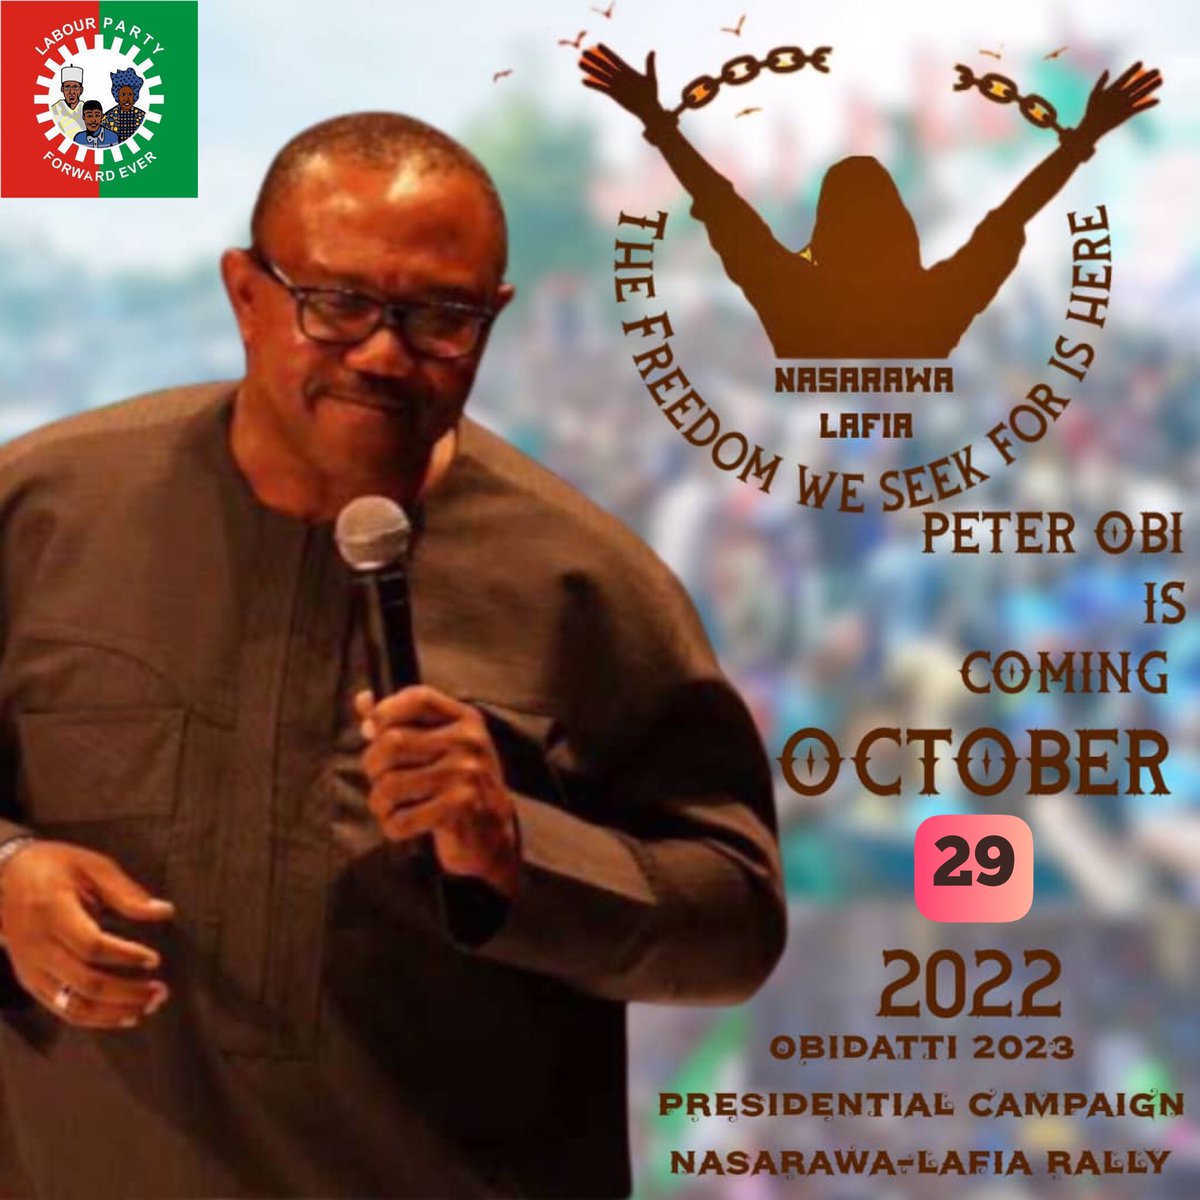 The freedom we seek for is Here 🙌🏽 The birth of a New Nation is getting closer ❤️ Nasarawa it’s your day to welcome our Senior Man @PeterObi #POisComing #POcampaignInNasarawa #POcampaignInLafia #ObiDattiCampaignInNasarawa